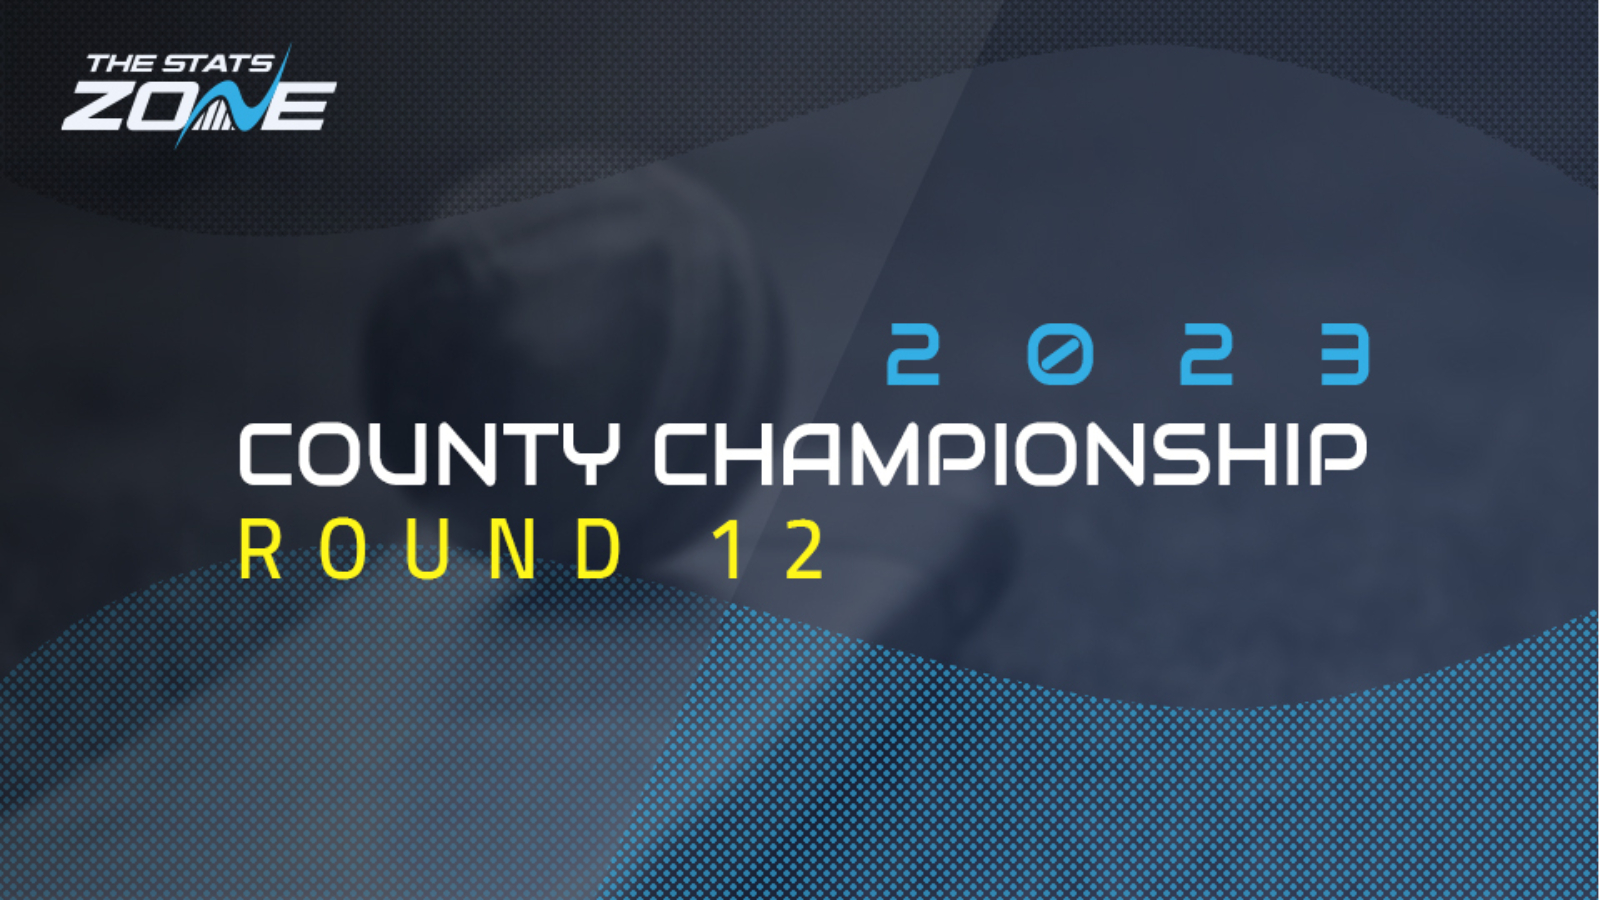 2023 County Championship Tips Round 12 The Stats Zone